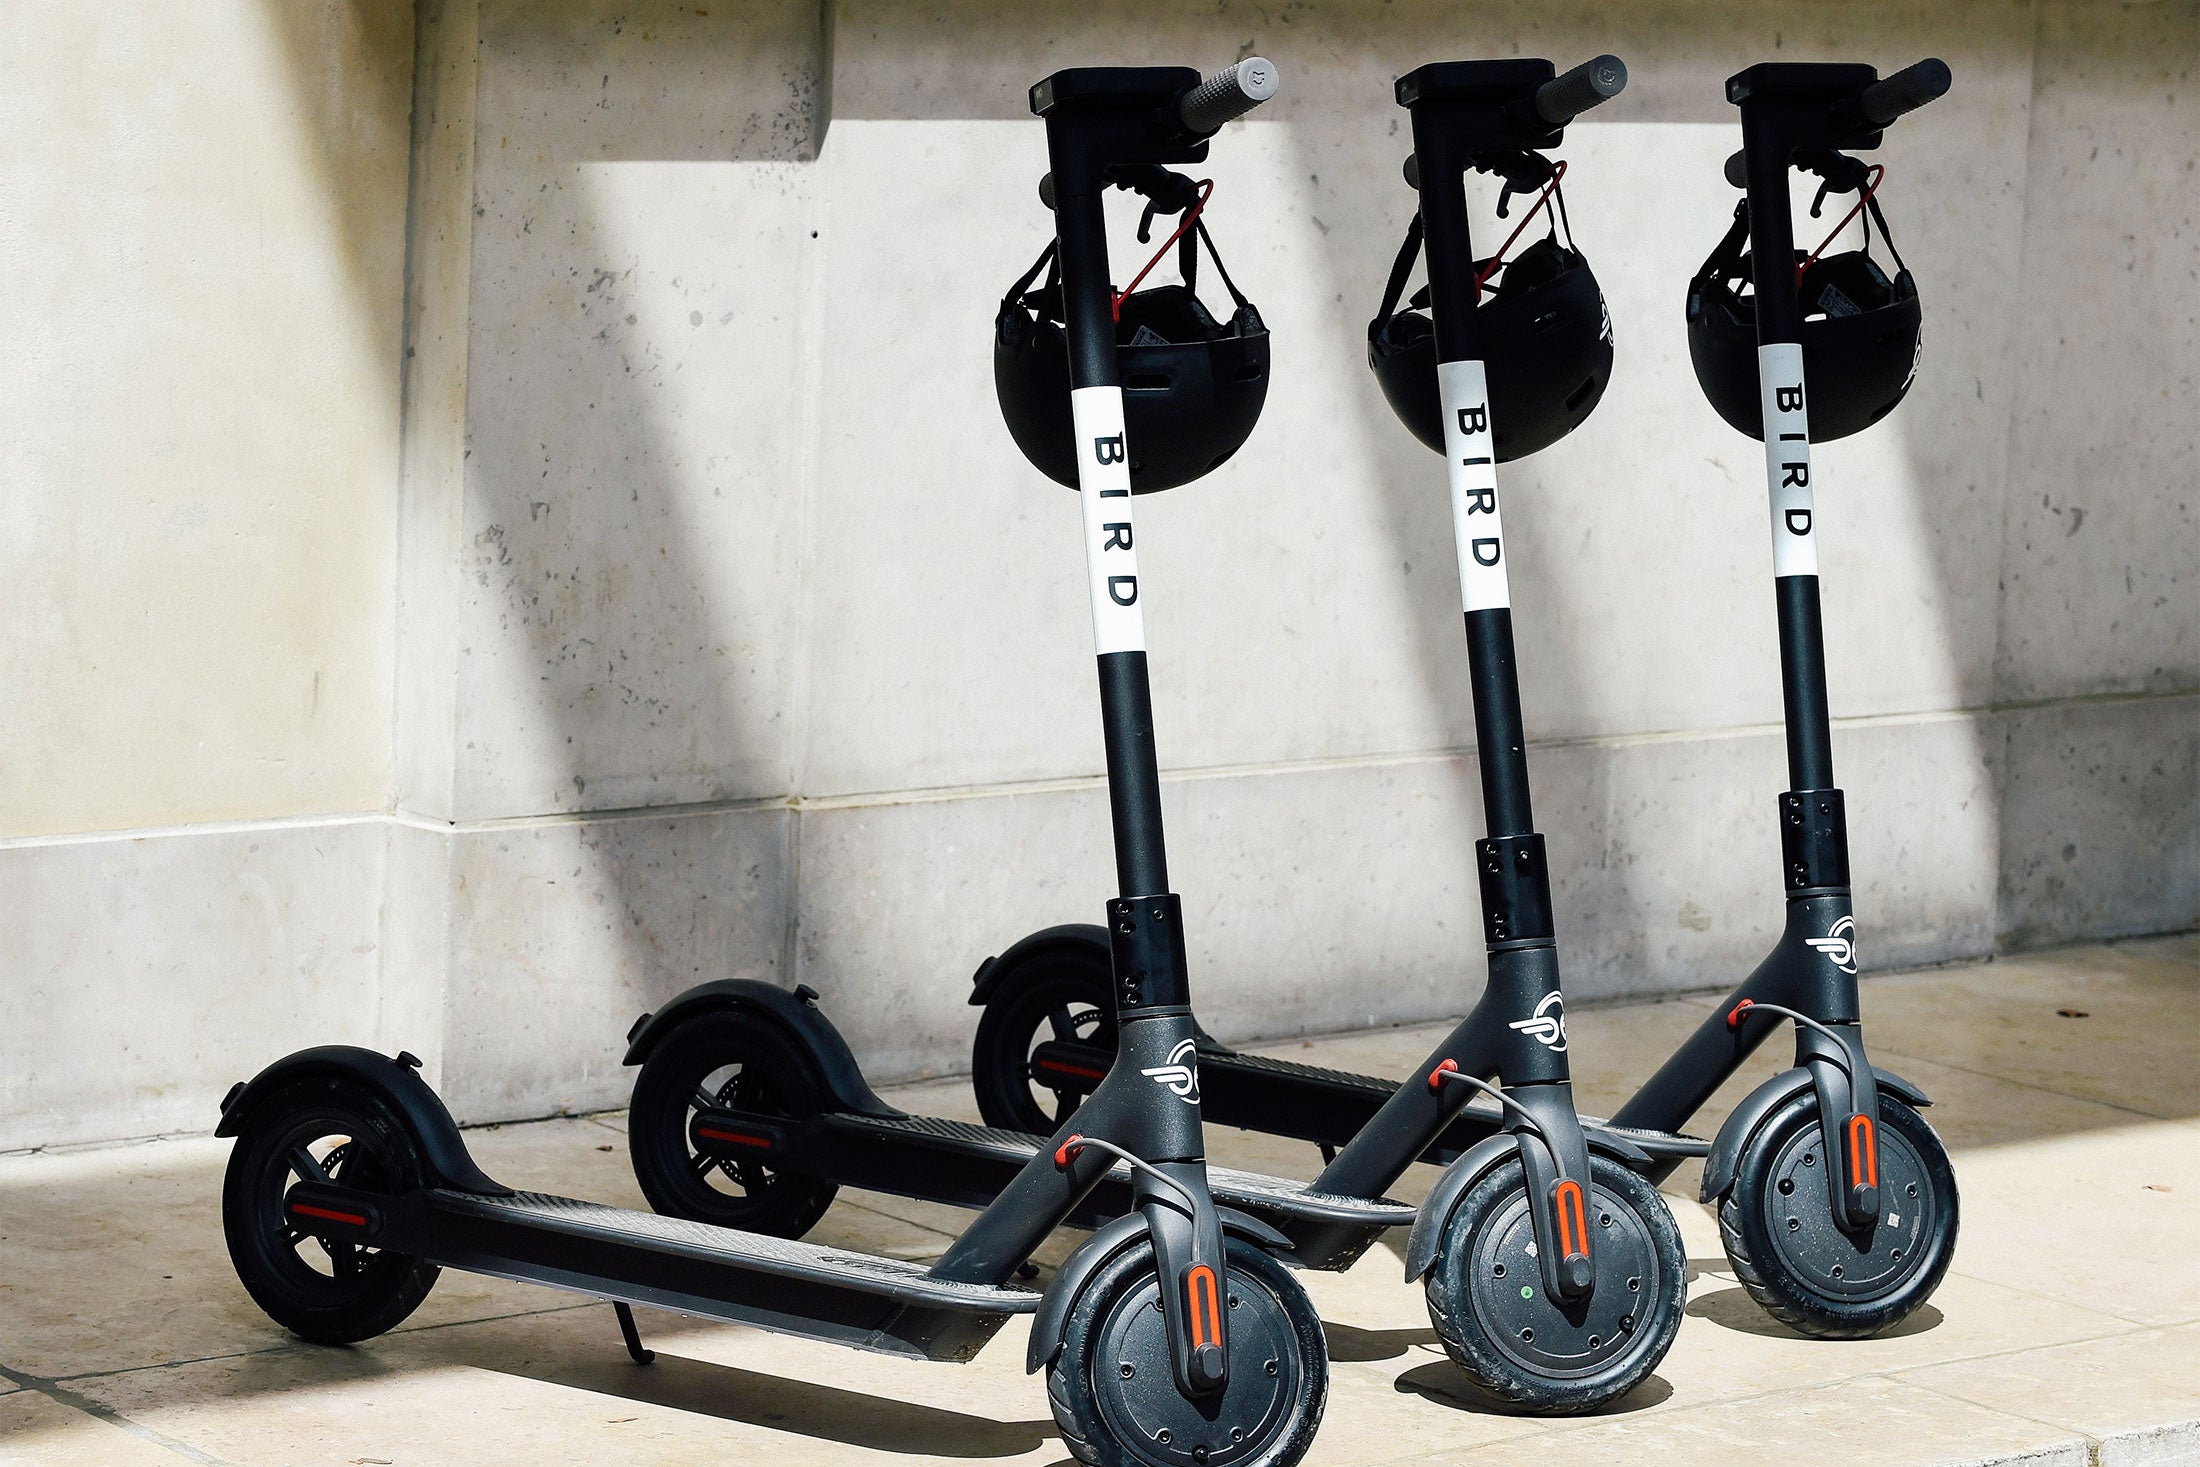 Three bird scooters with helmets hanging from the handlebars.